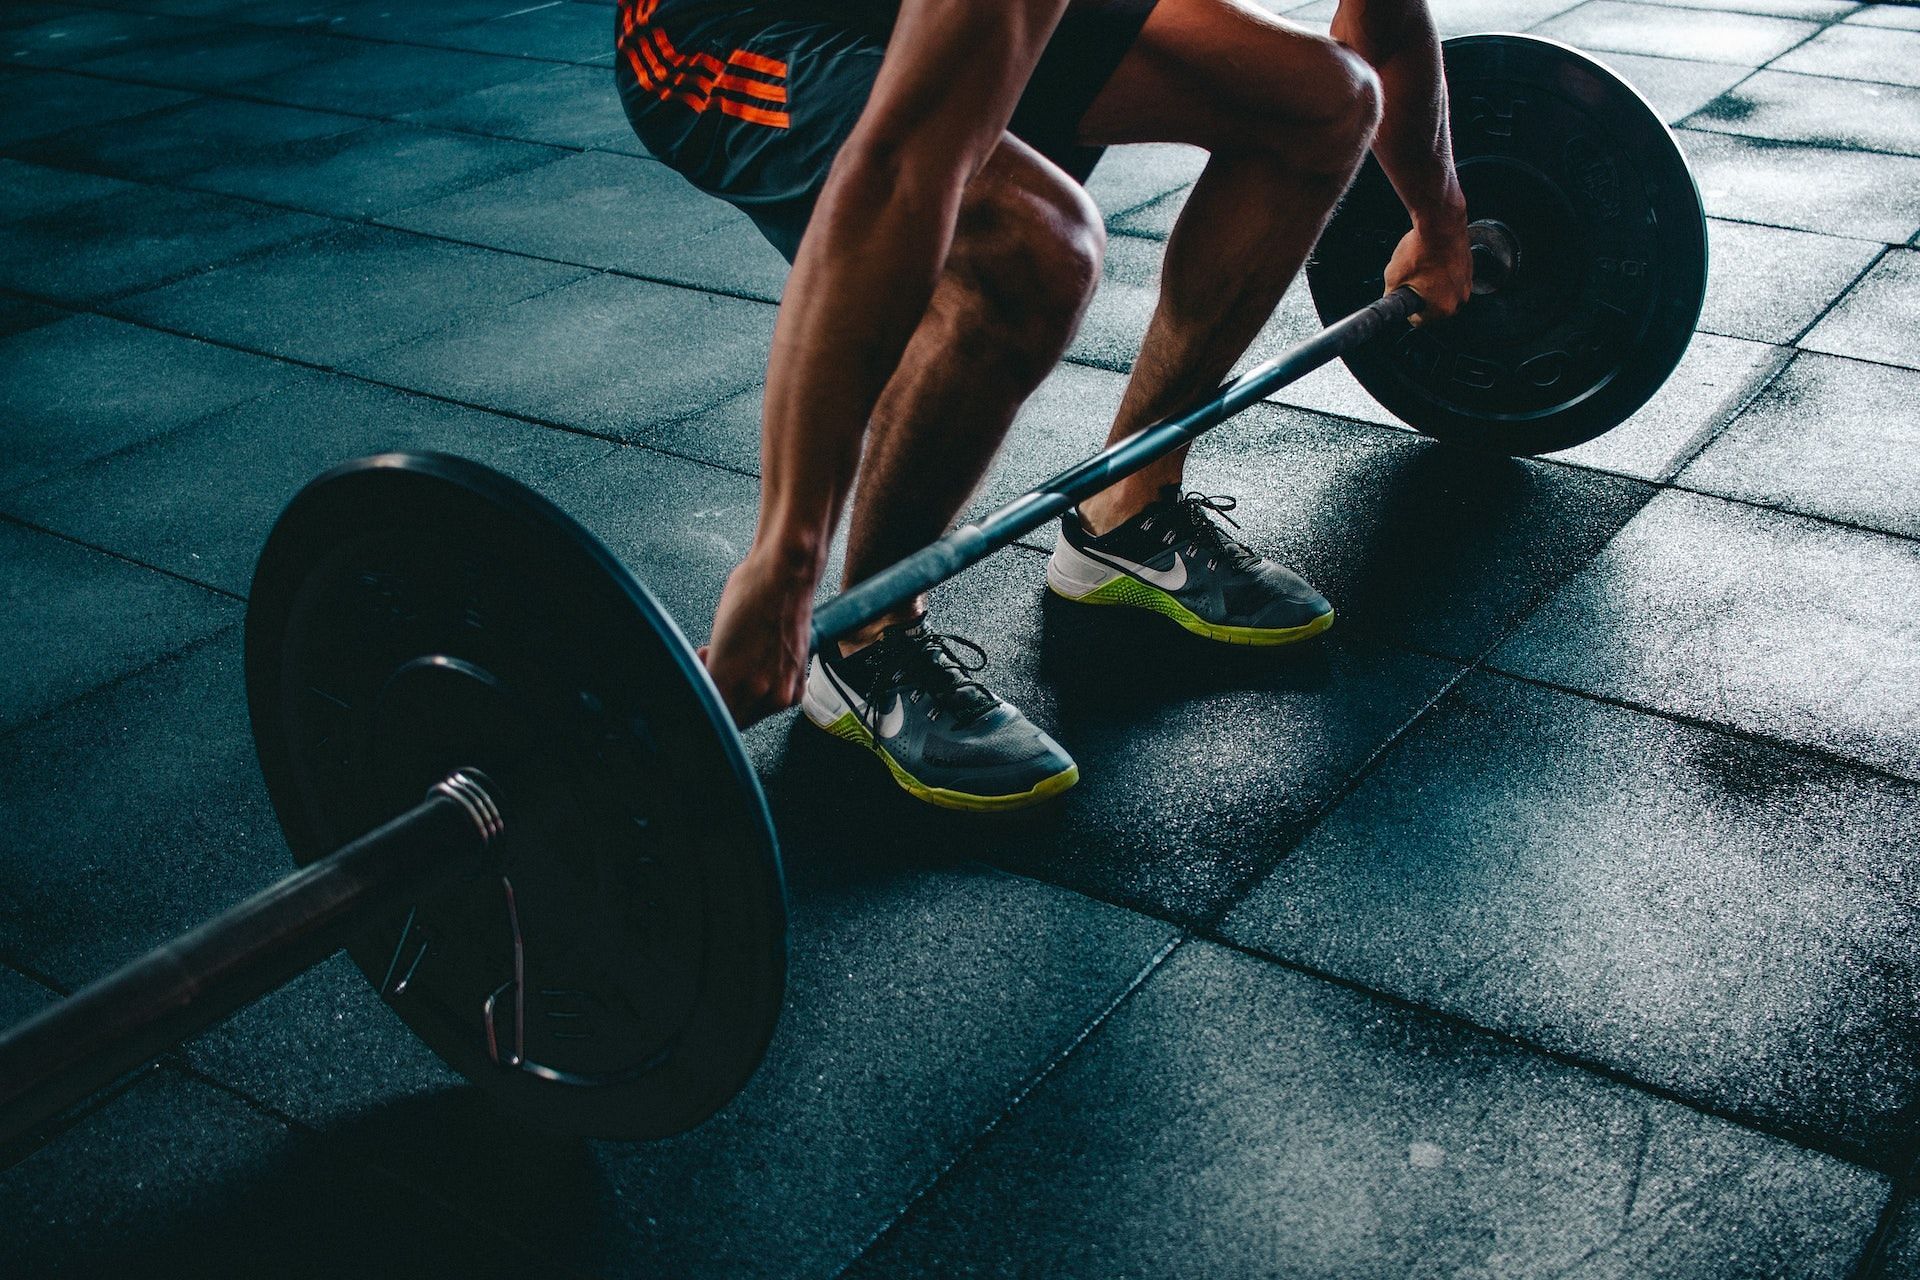 Squats primarily target the lower body muscles. (Photo via Pexels/Victor Freitas)